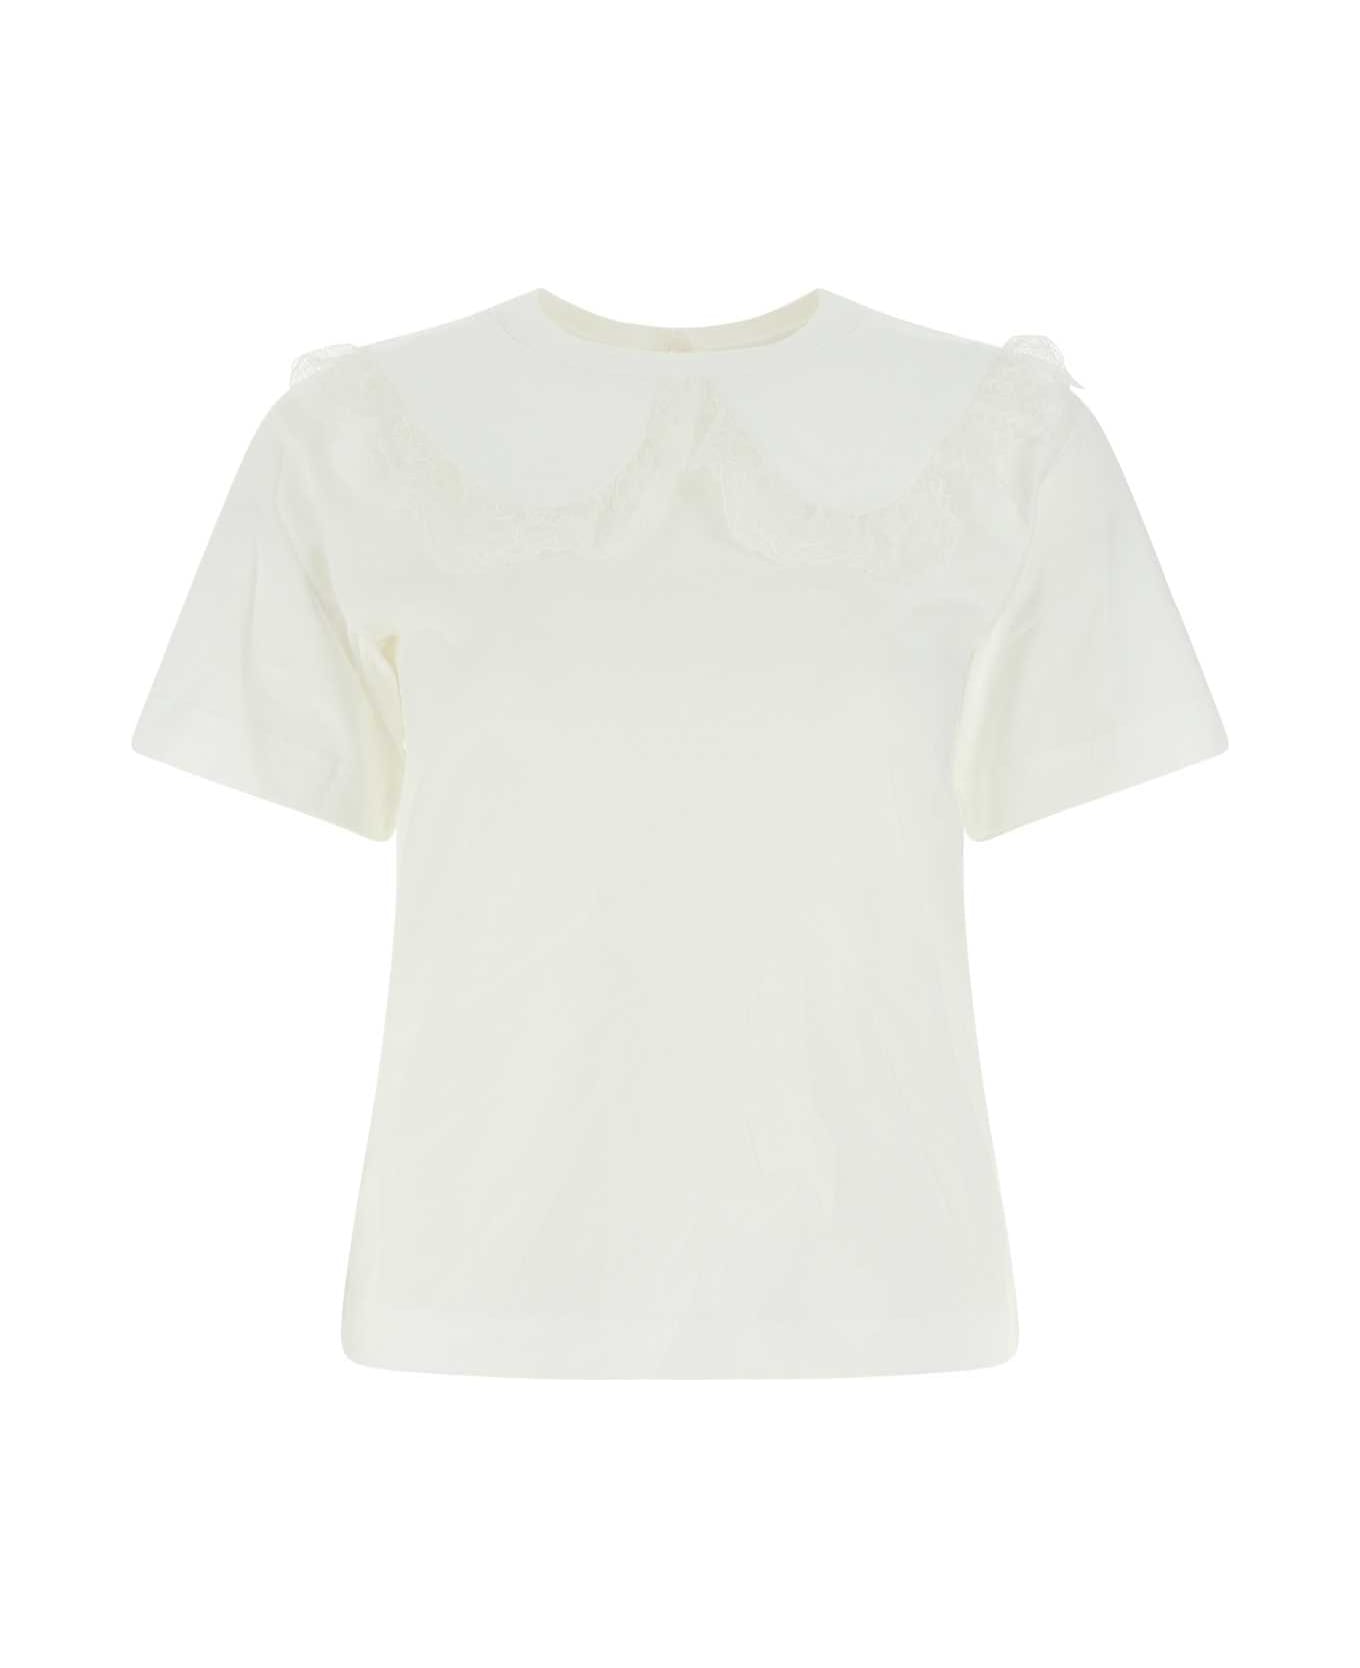 See by Chloé White Cotton T-shirt - 101